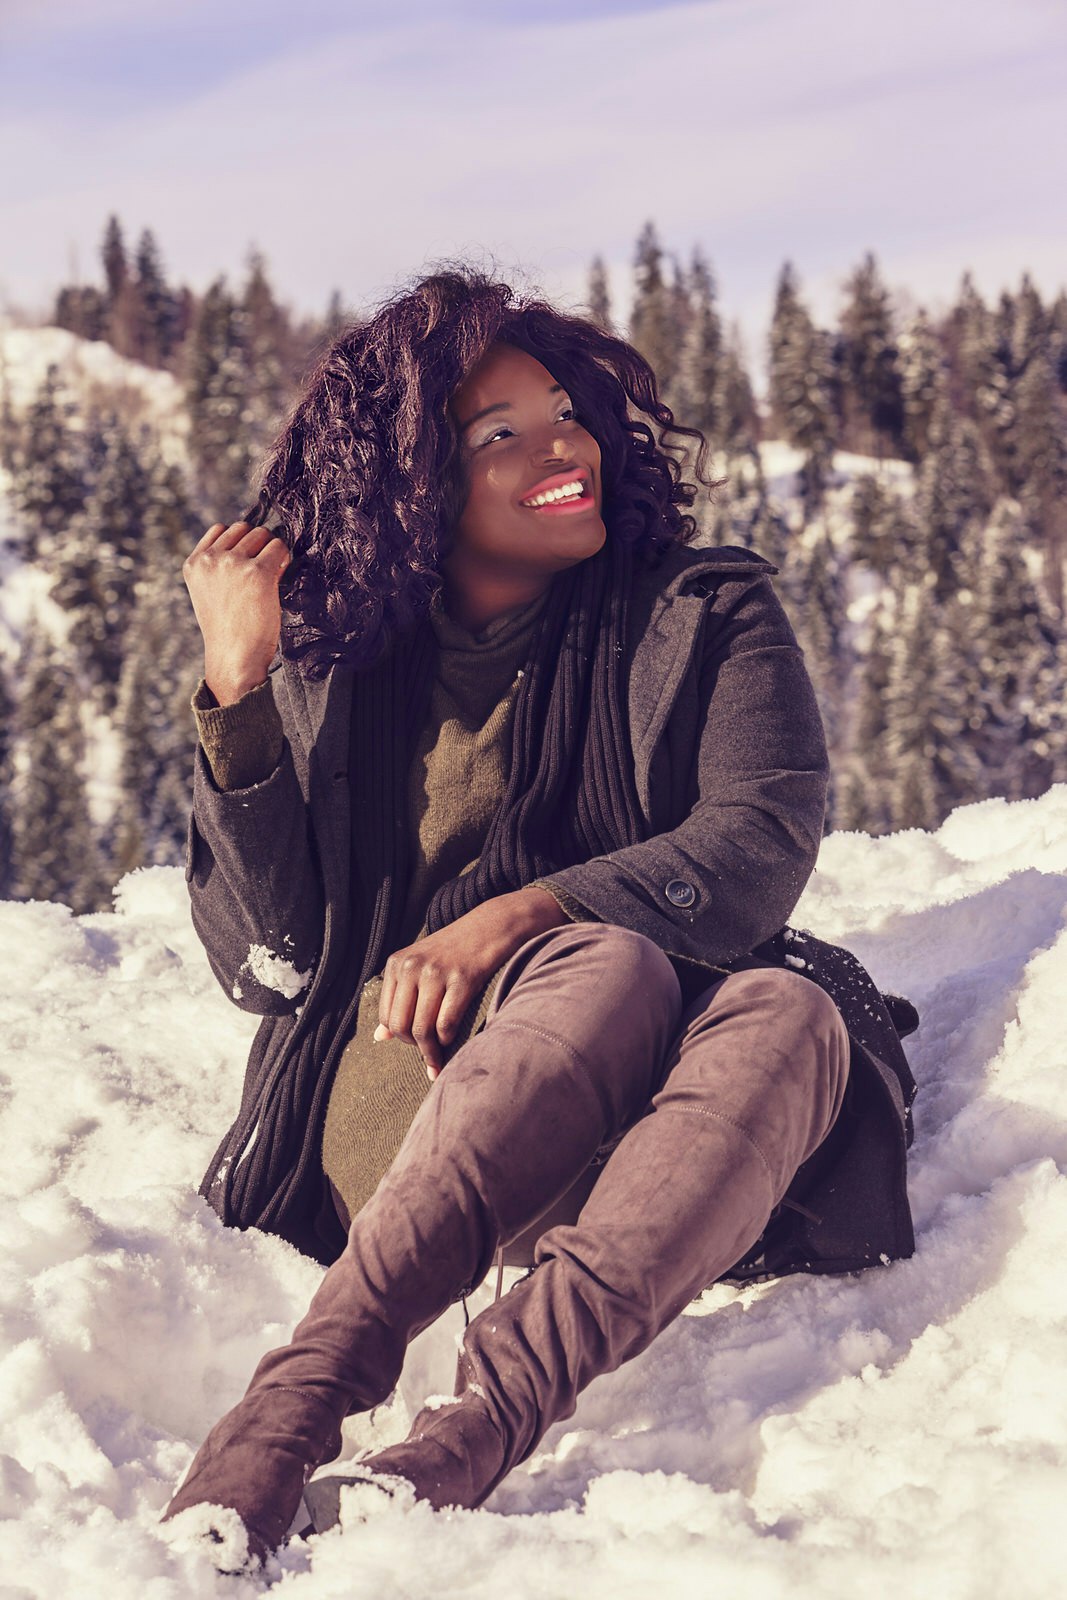 A woman sitting in crisp white snow in front of some snow-covered coniferous trees. She is playing with her hair and looking off to the side, smiling. She is dressed stylishly in a wool dress, warm coat, scarf, and over-the-knee boots.